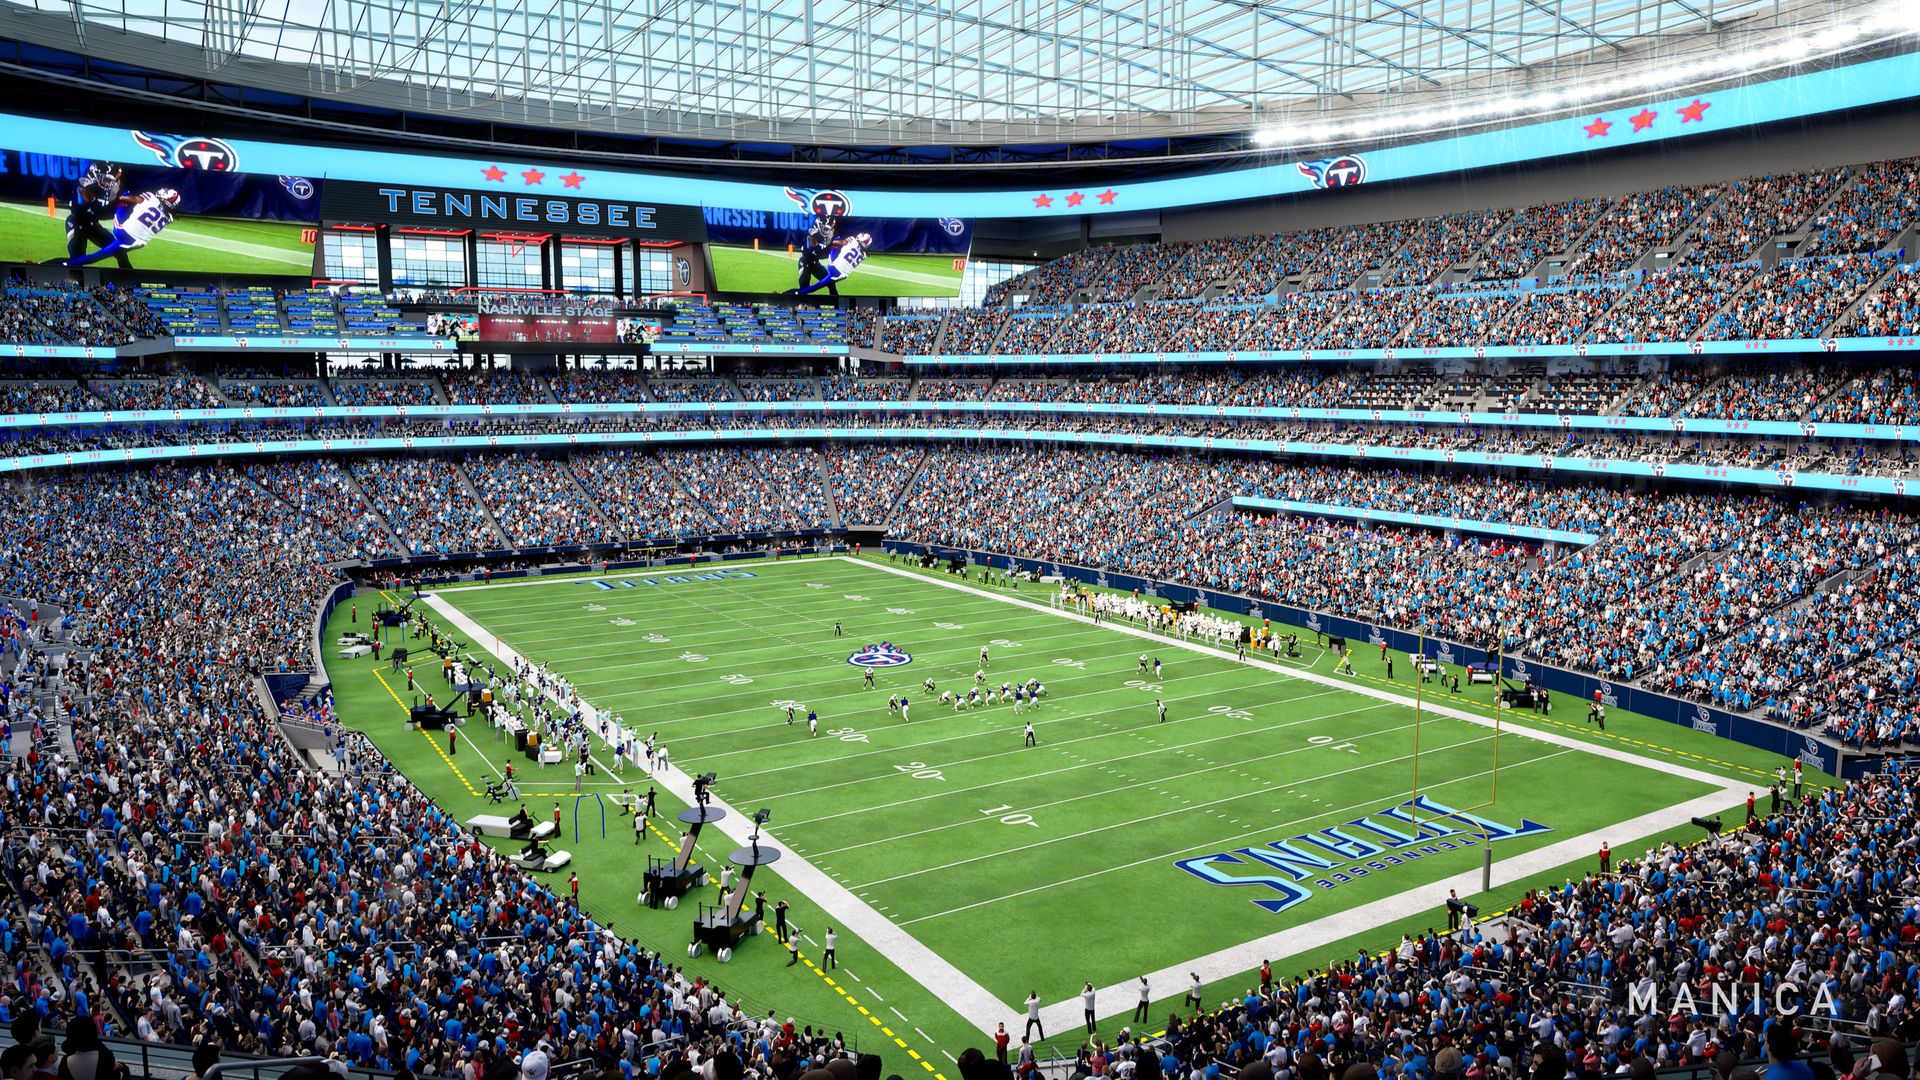 A rendering of the interior of the Titans' proposed stadium.